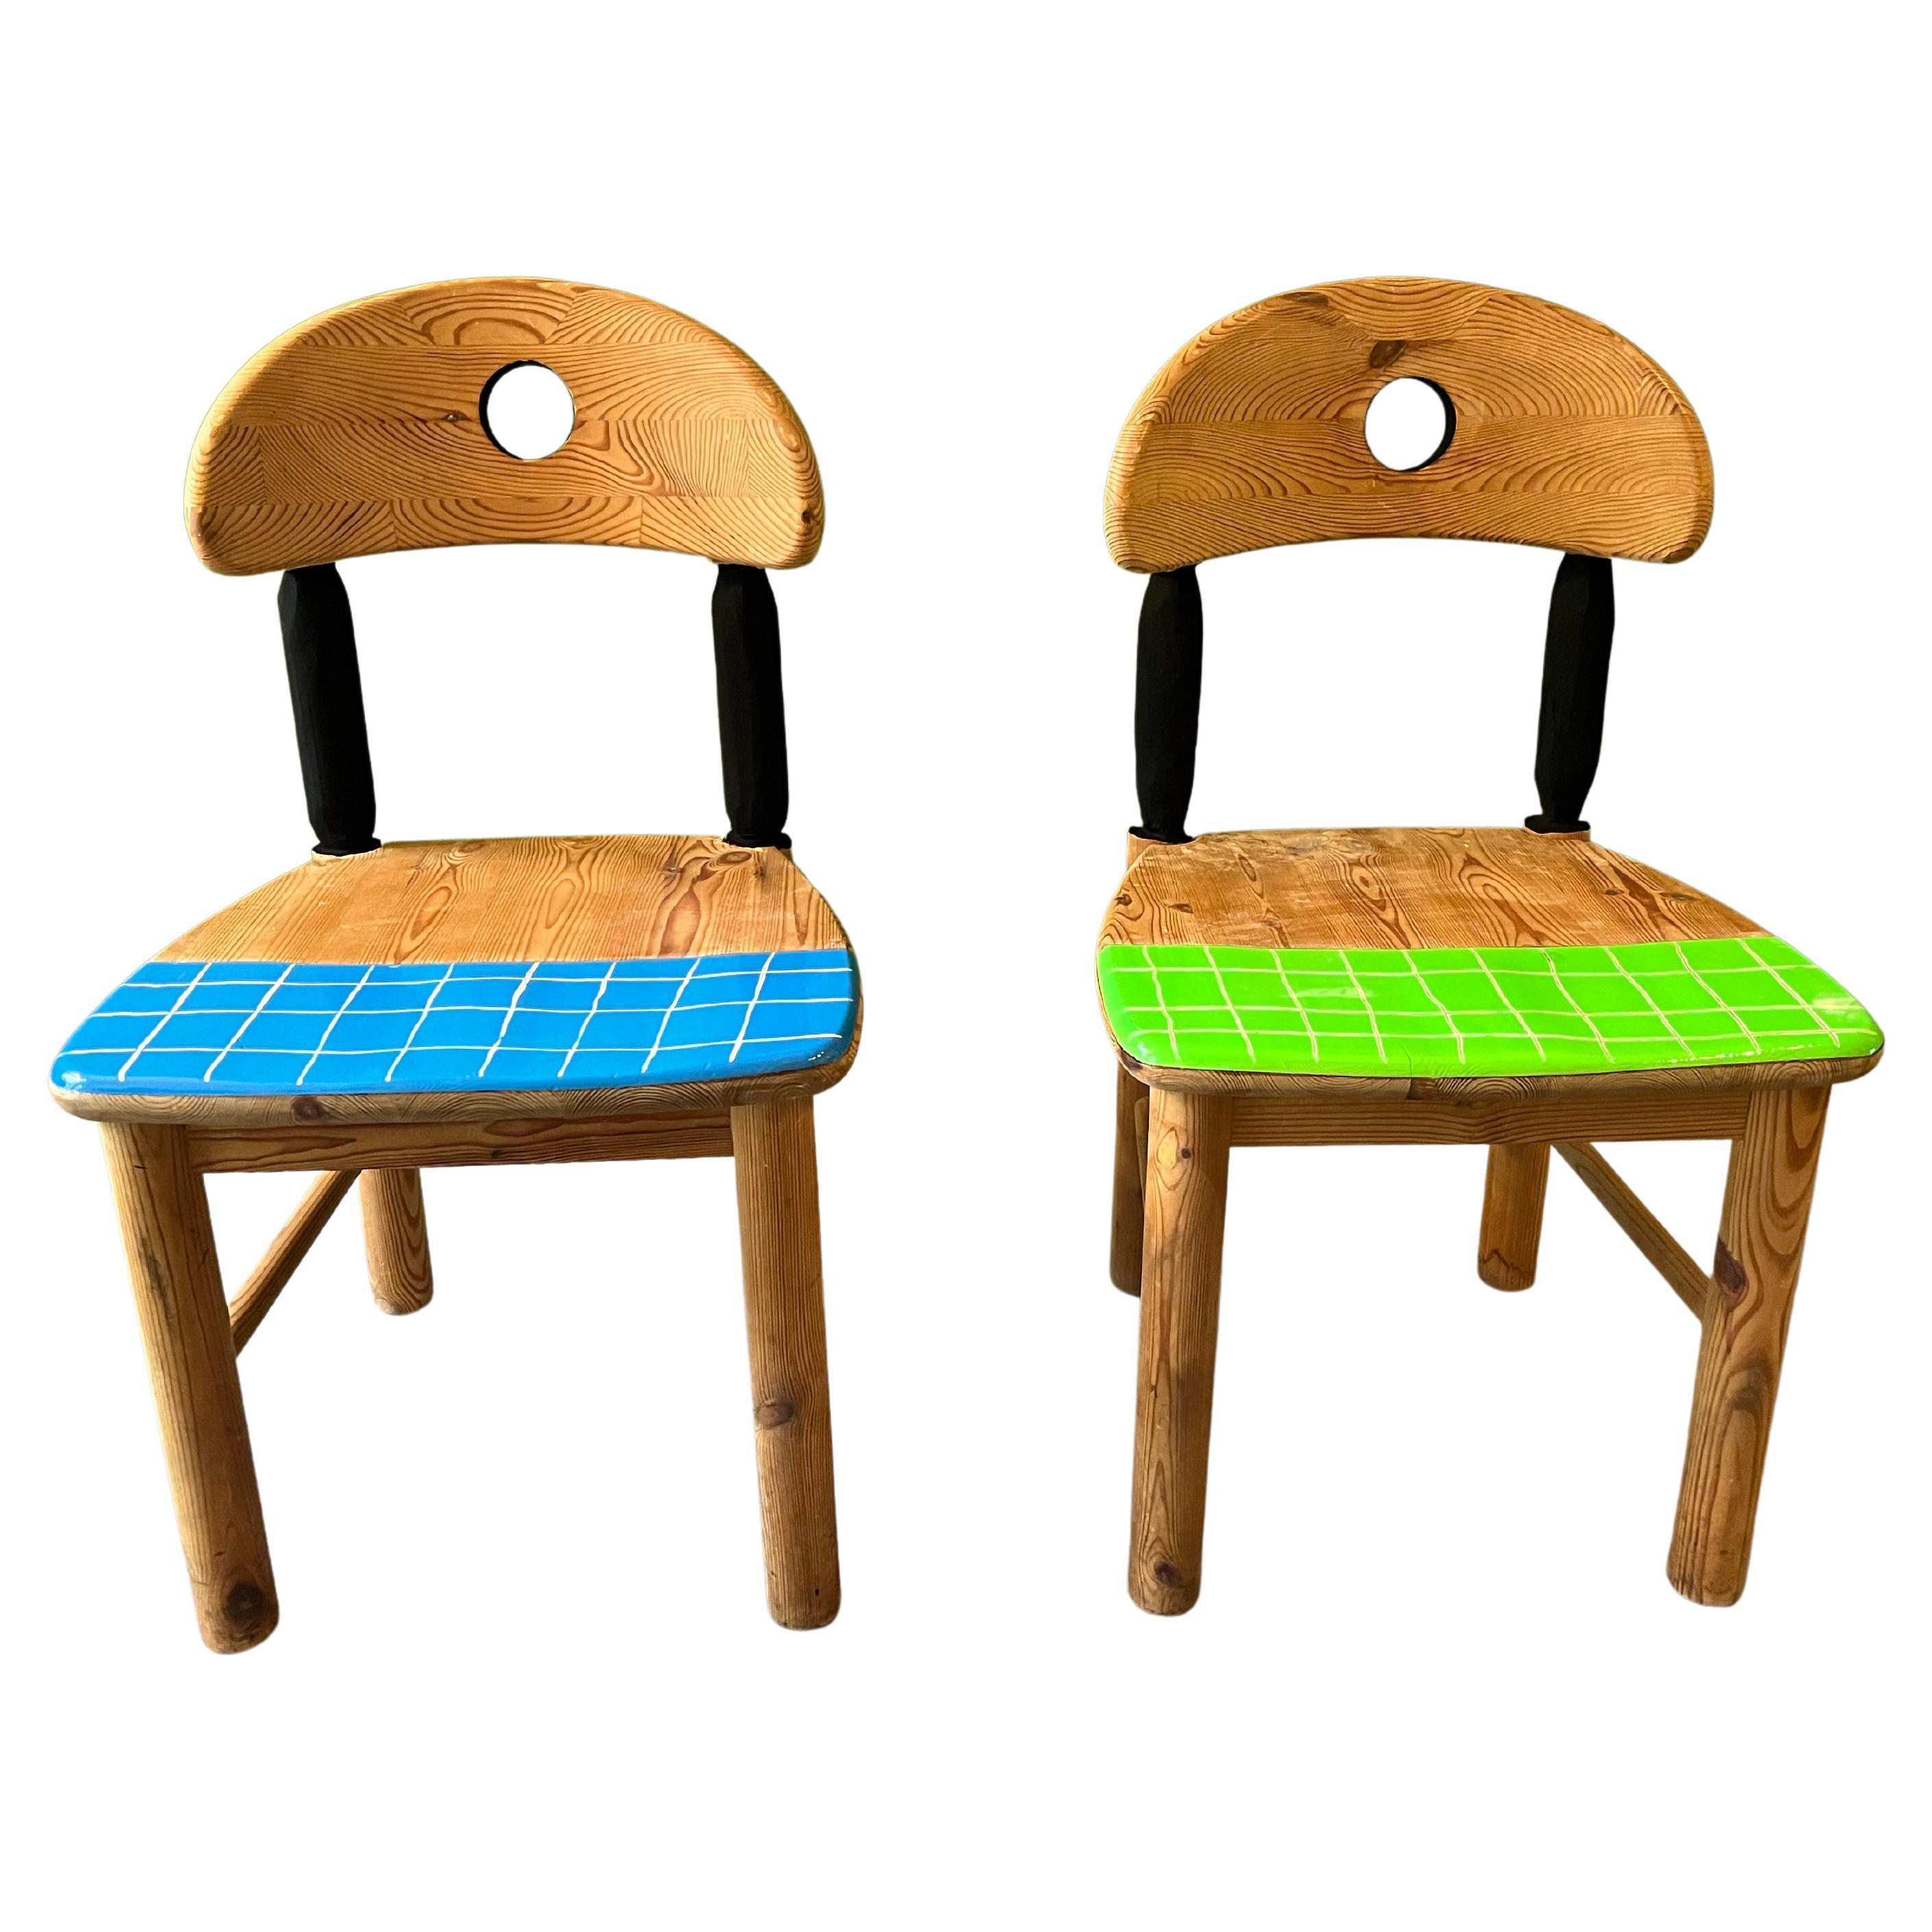 Dansk classics, Daumiller/ handmade, cut, painted and multi-lacquered. These chairs have been contemporized by the functional artist Staab, they are one of kind.
Through my work I transform each chair into a unique and individual object. Chairs that